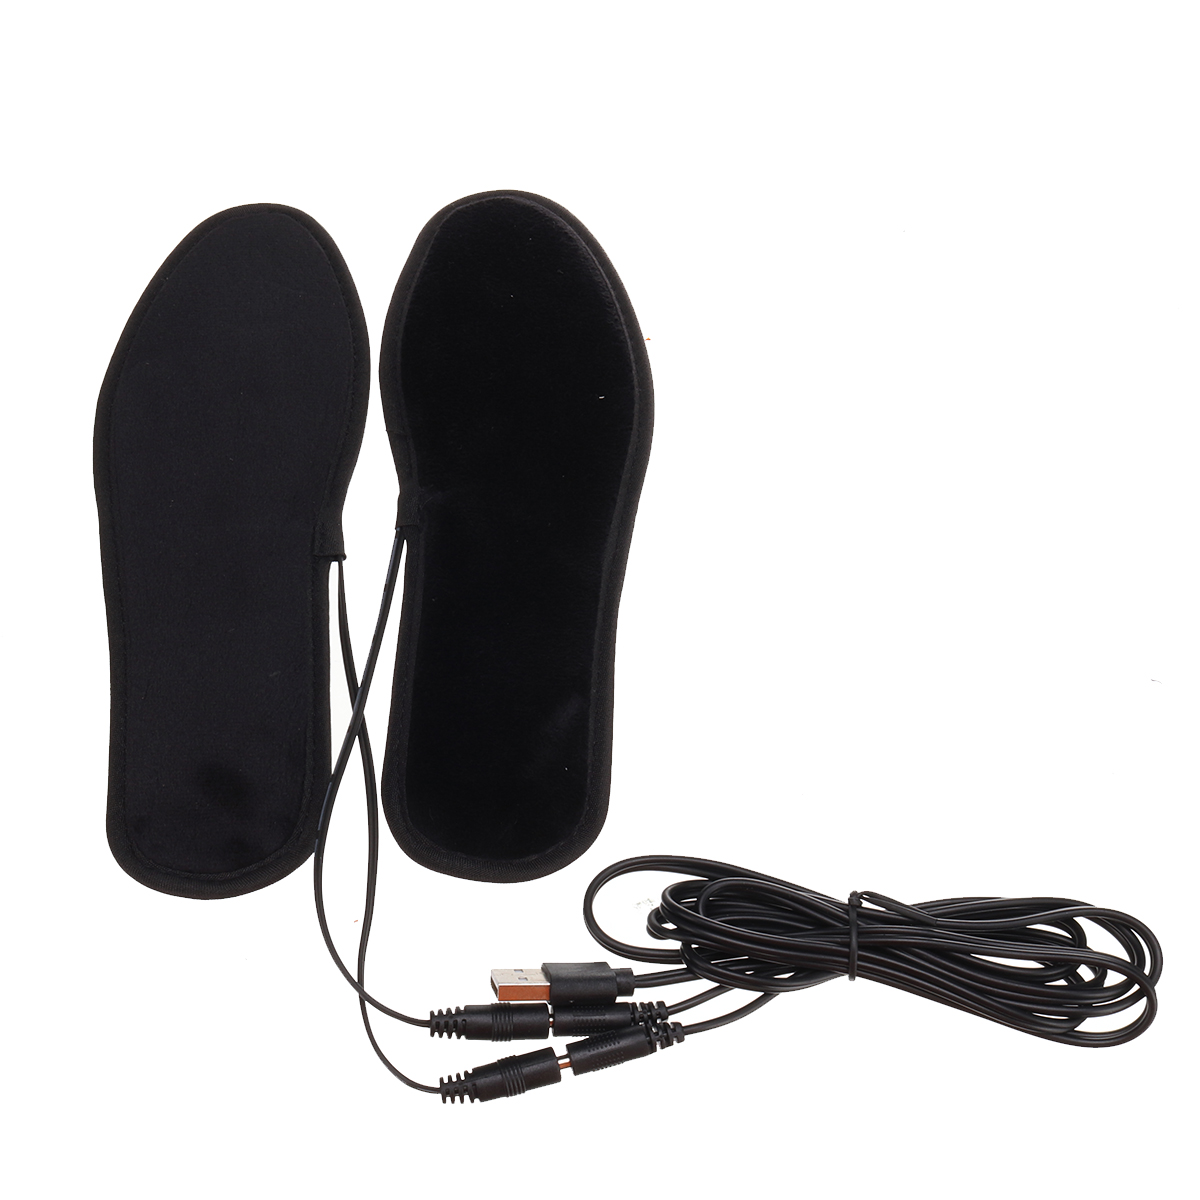 USB-Electric-Powered-Heated-Shoe-Insoles-Film-Heater-Feet-Warm-Foot-Socks-Pads-For-Camping-Mountaine-1931178-2